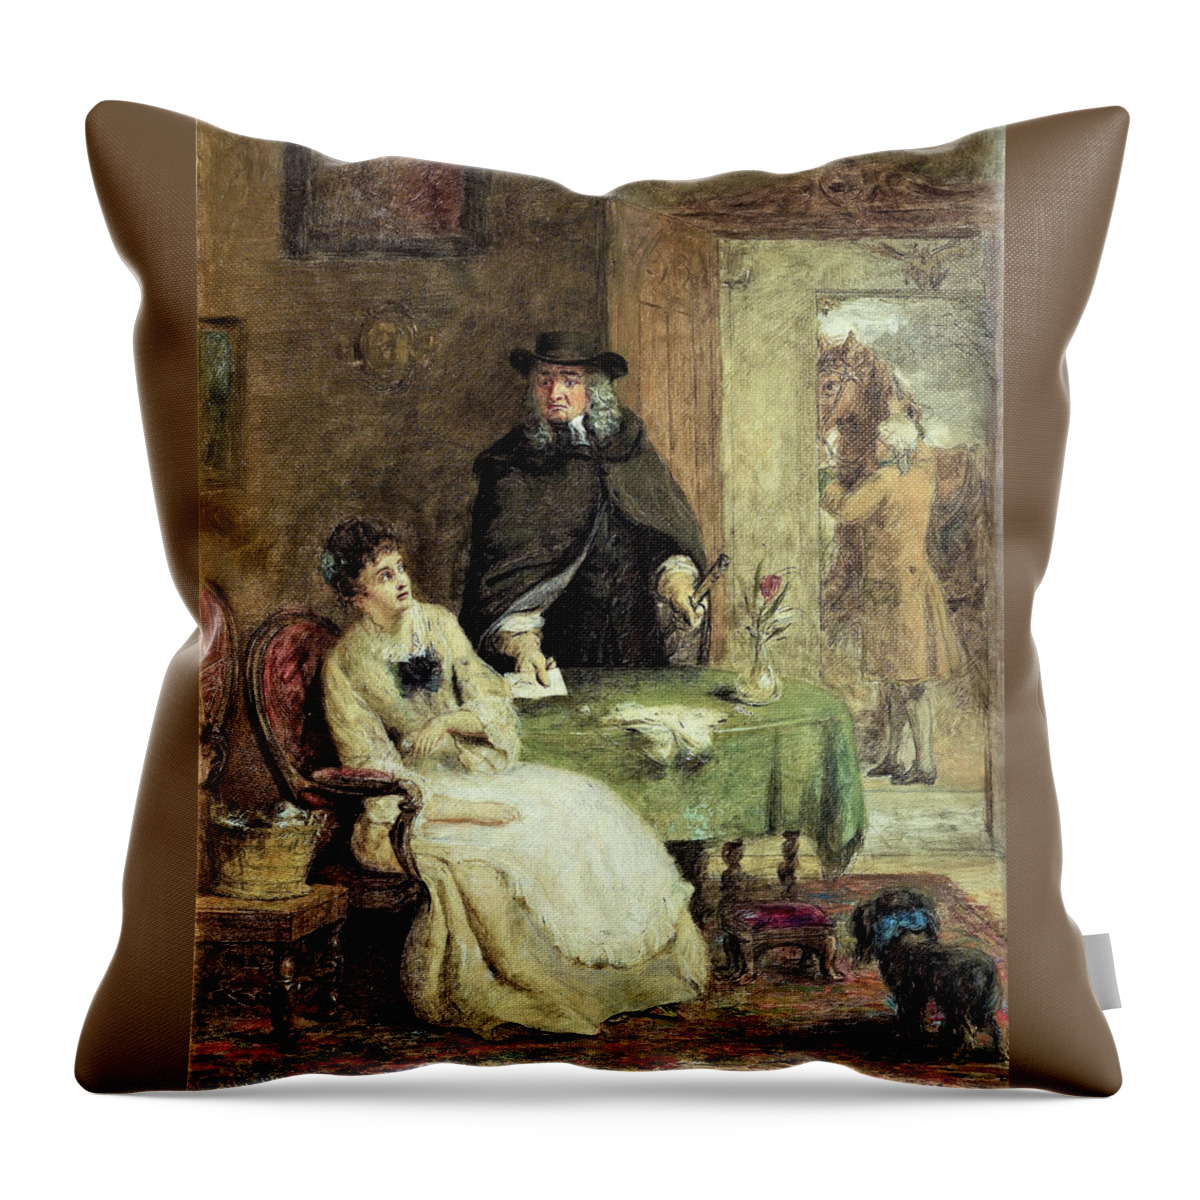 William Powell Frith Throw Pillow featuring the painting Jonathan Swift and Vanessa - Digital Remastered Edition by William Powell Frith